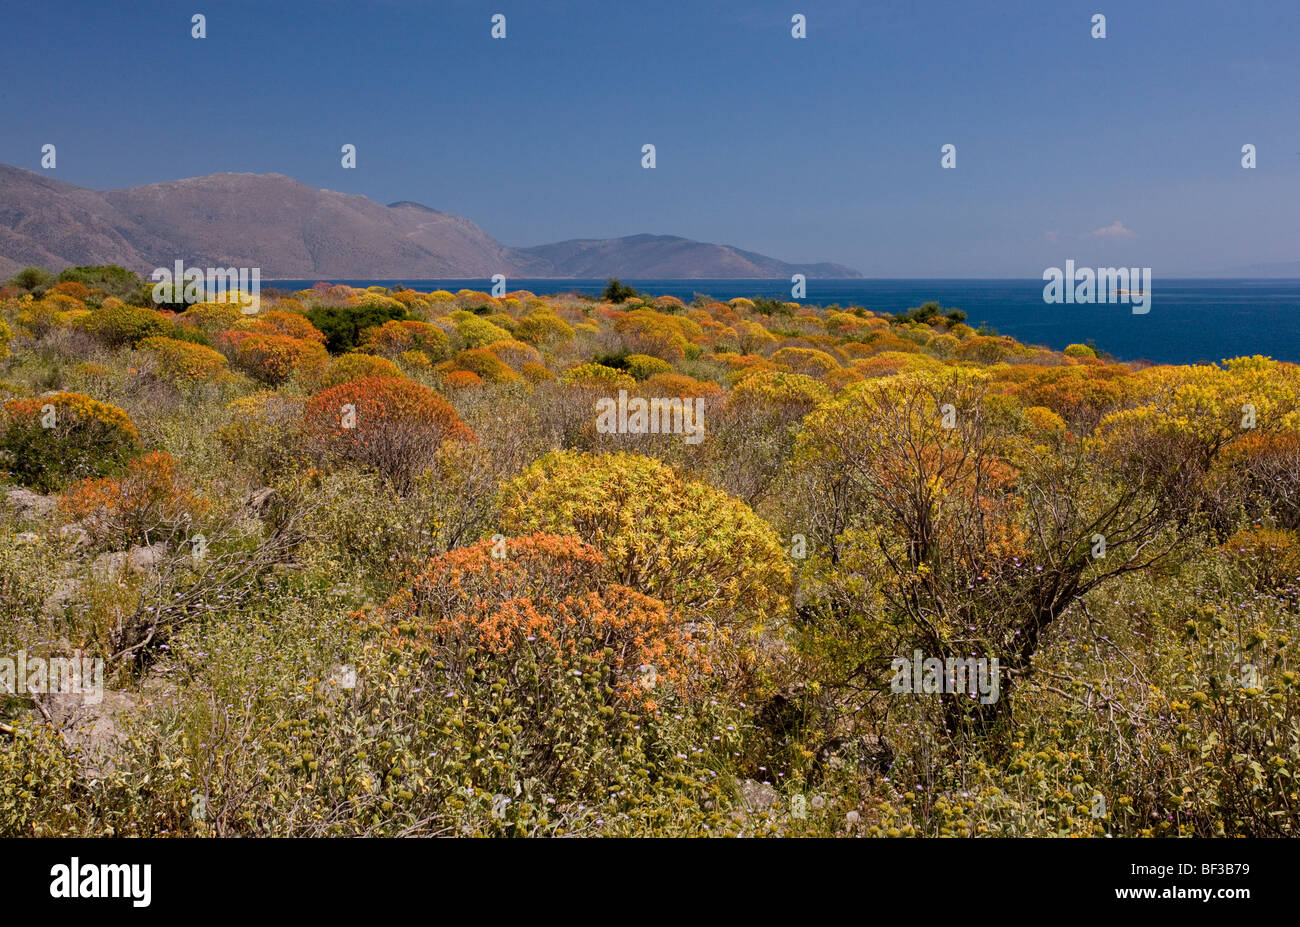 Mass of Tree Spurge Euphorbia dendroides beginning to colour up; on the shores of the Gulf of Corinth (Korinth), Greece. Stock Photo